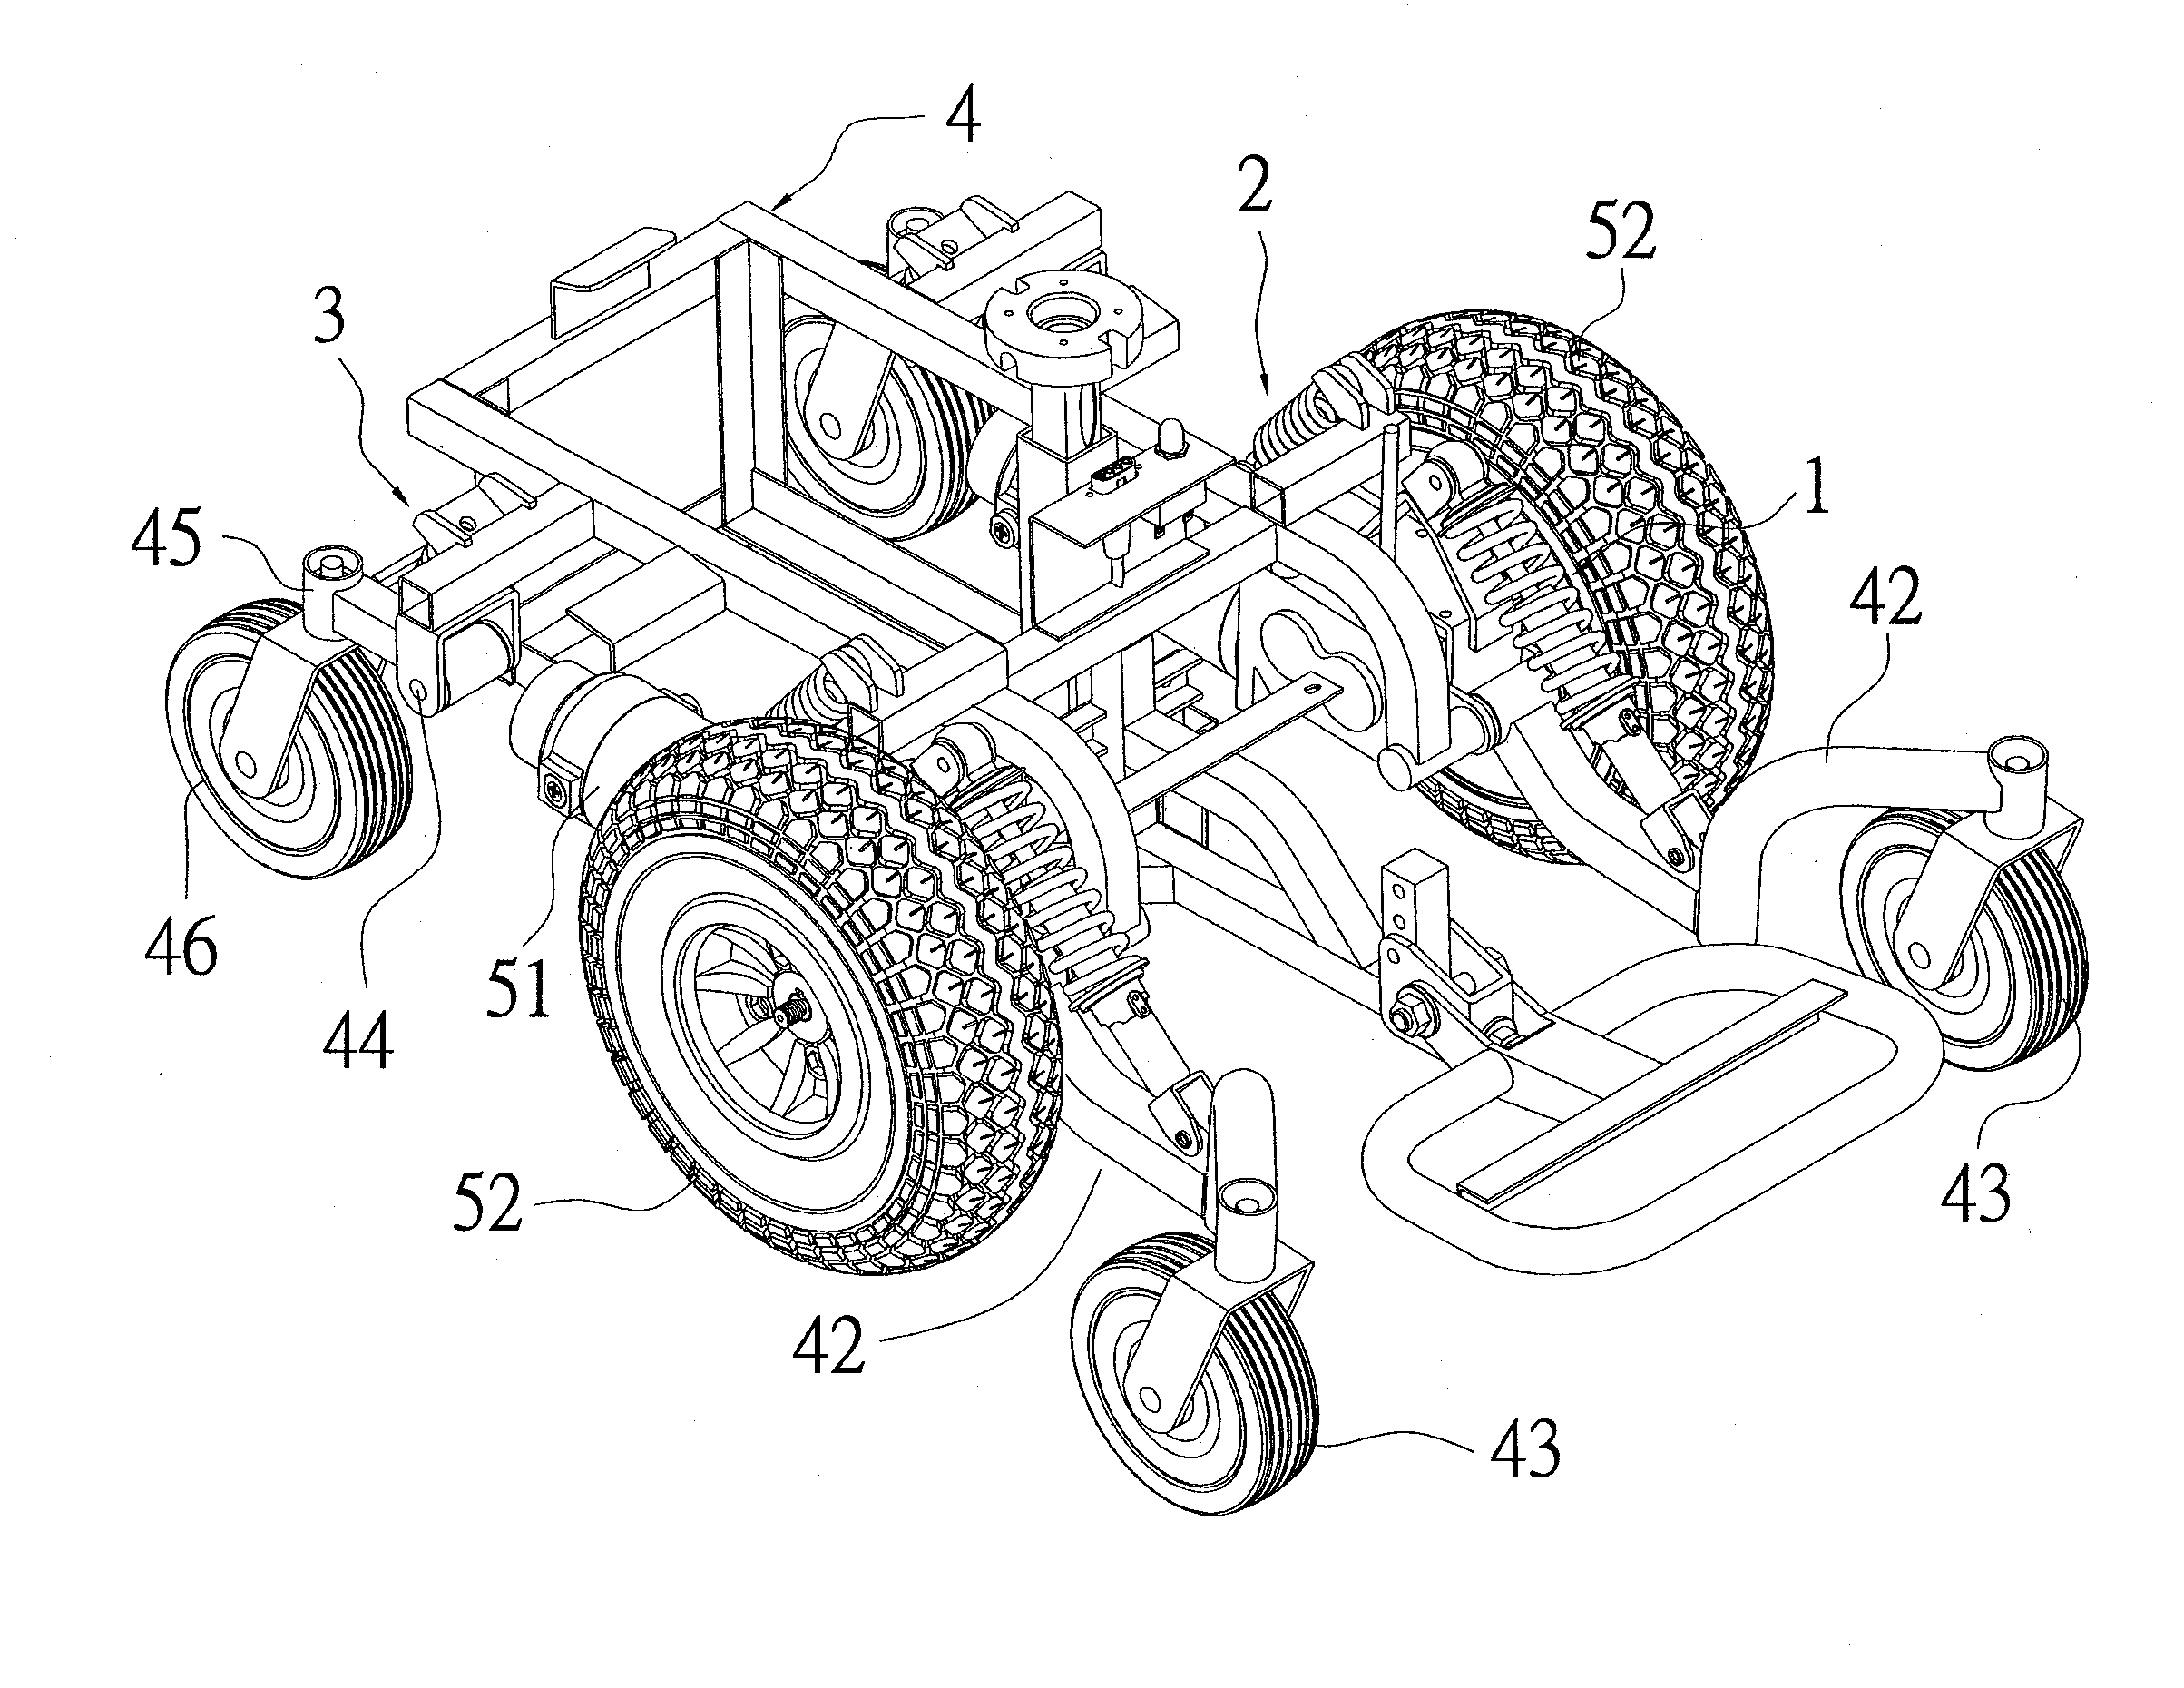 Suspension system for electric wheelchair